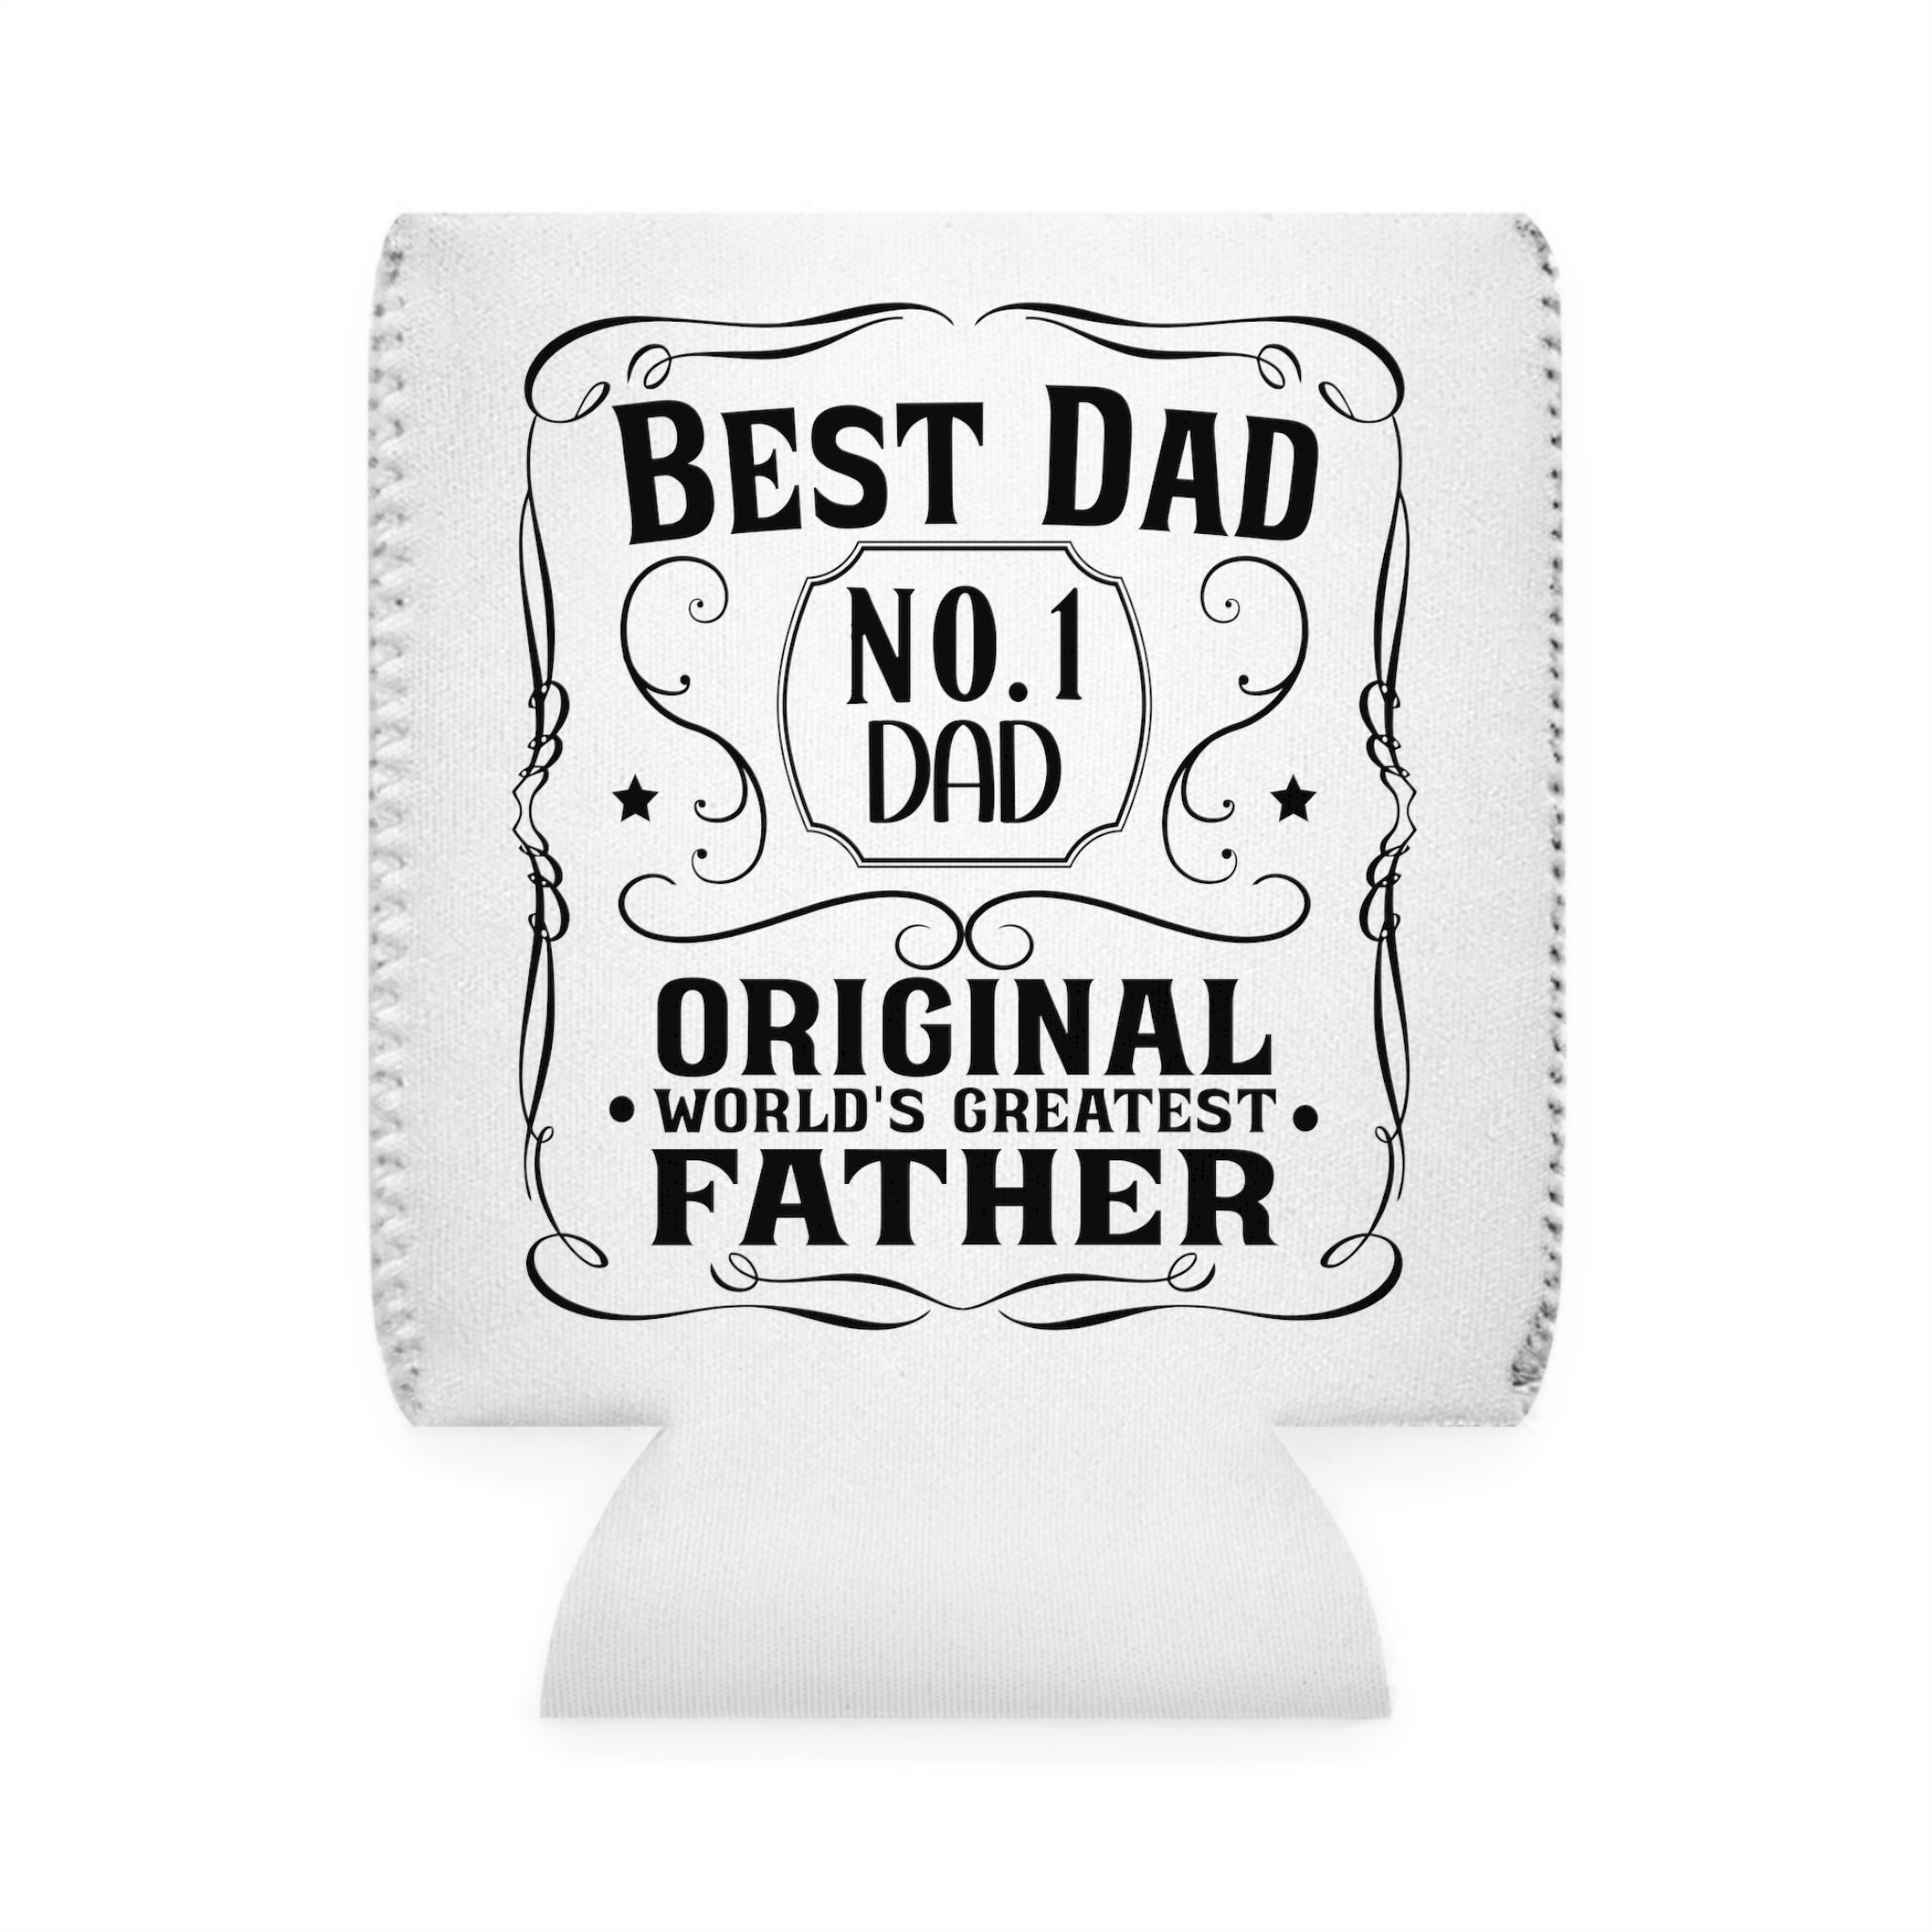 No. 1 Dad Can Cooler Sleeve